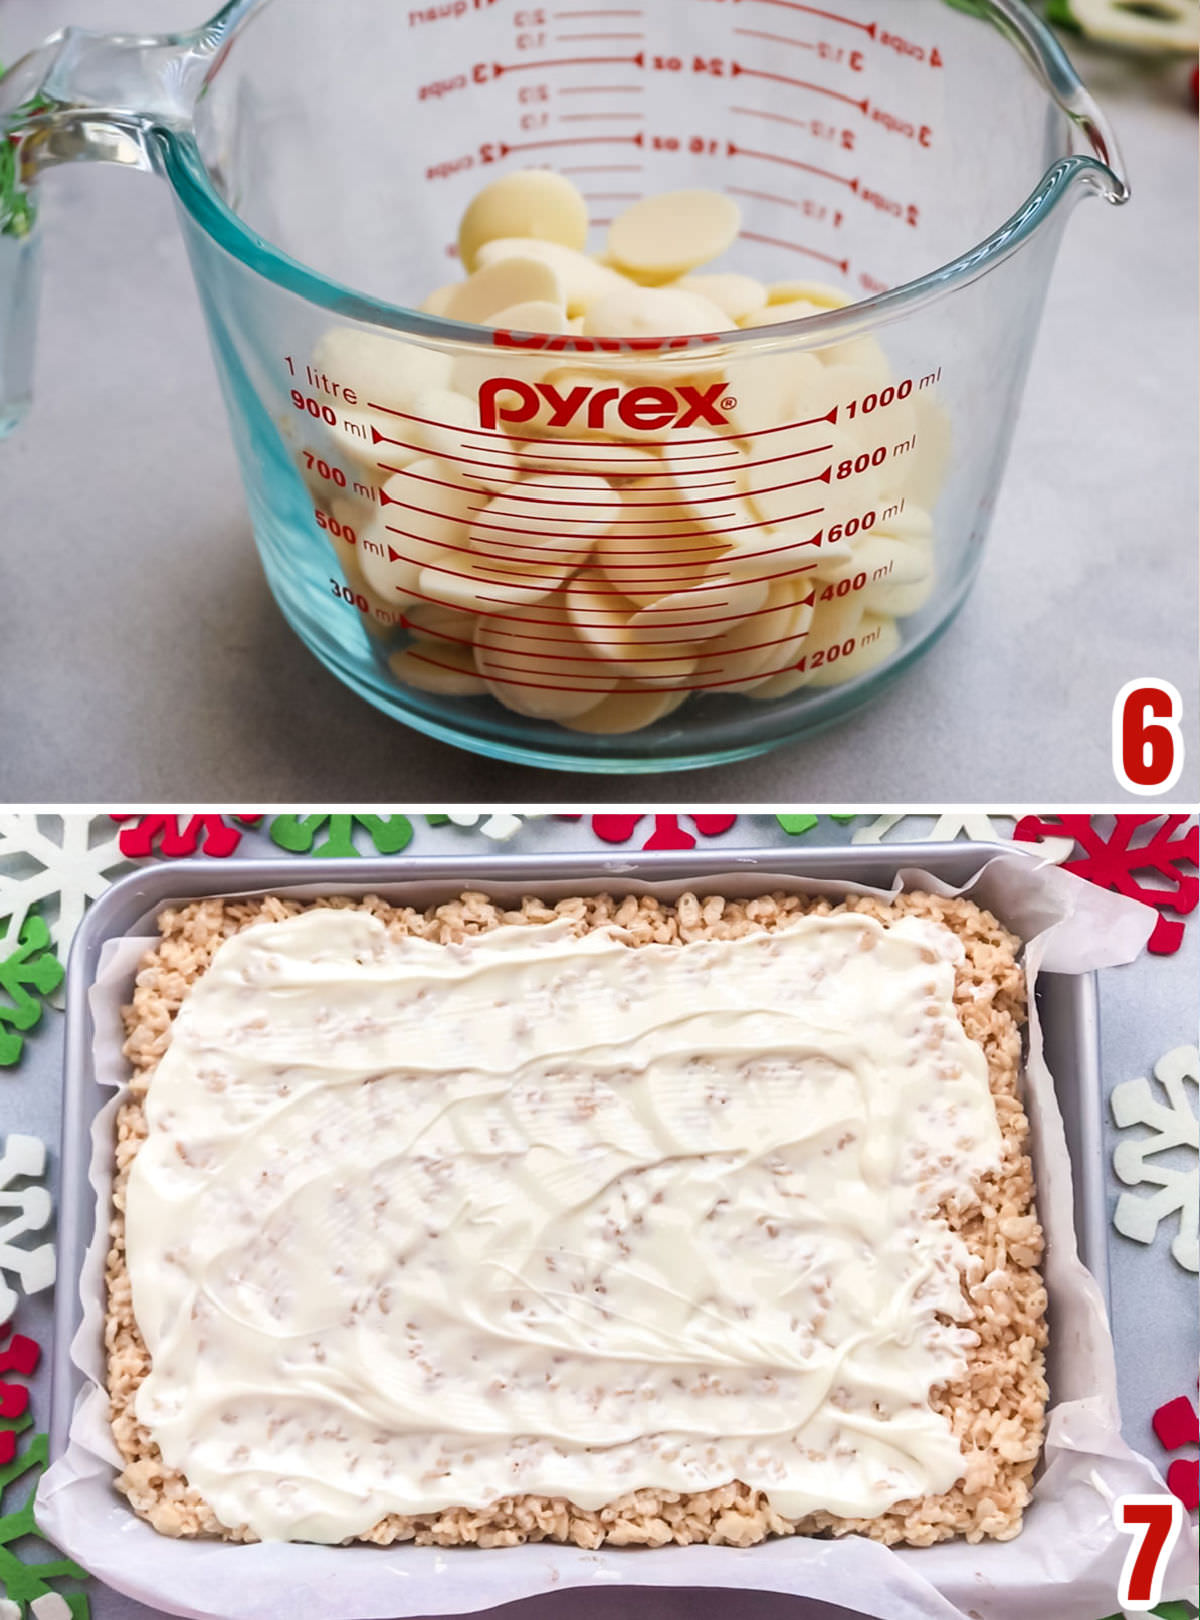 Collage image showing how to melt the white chocolate to create a white chocolate layer on the Brownie bar.